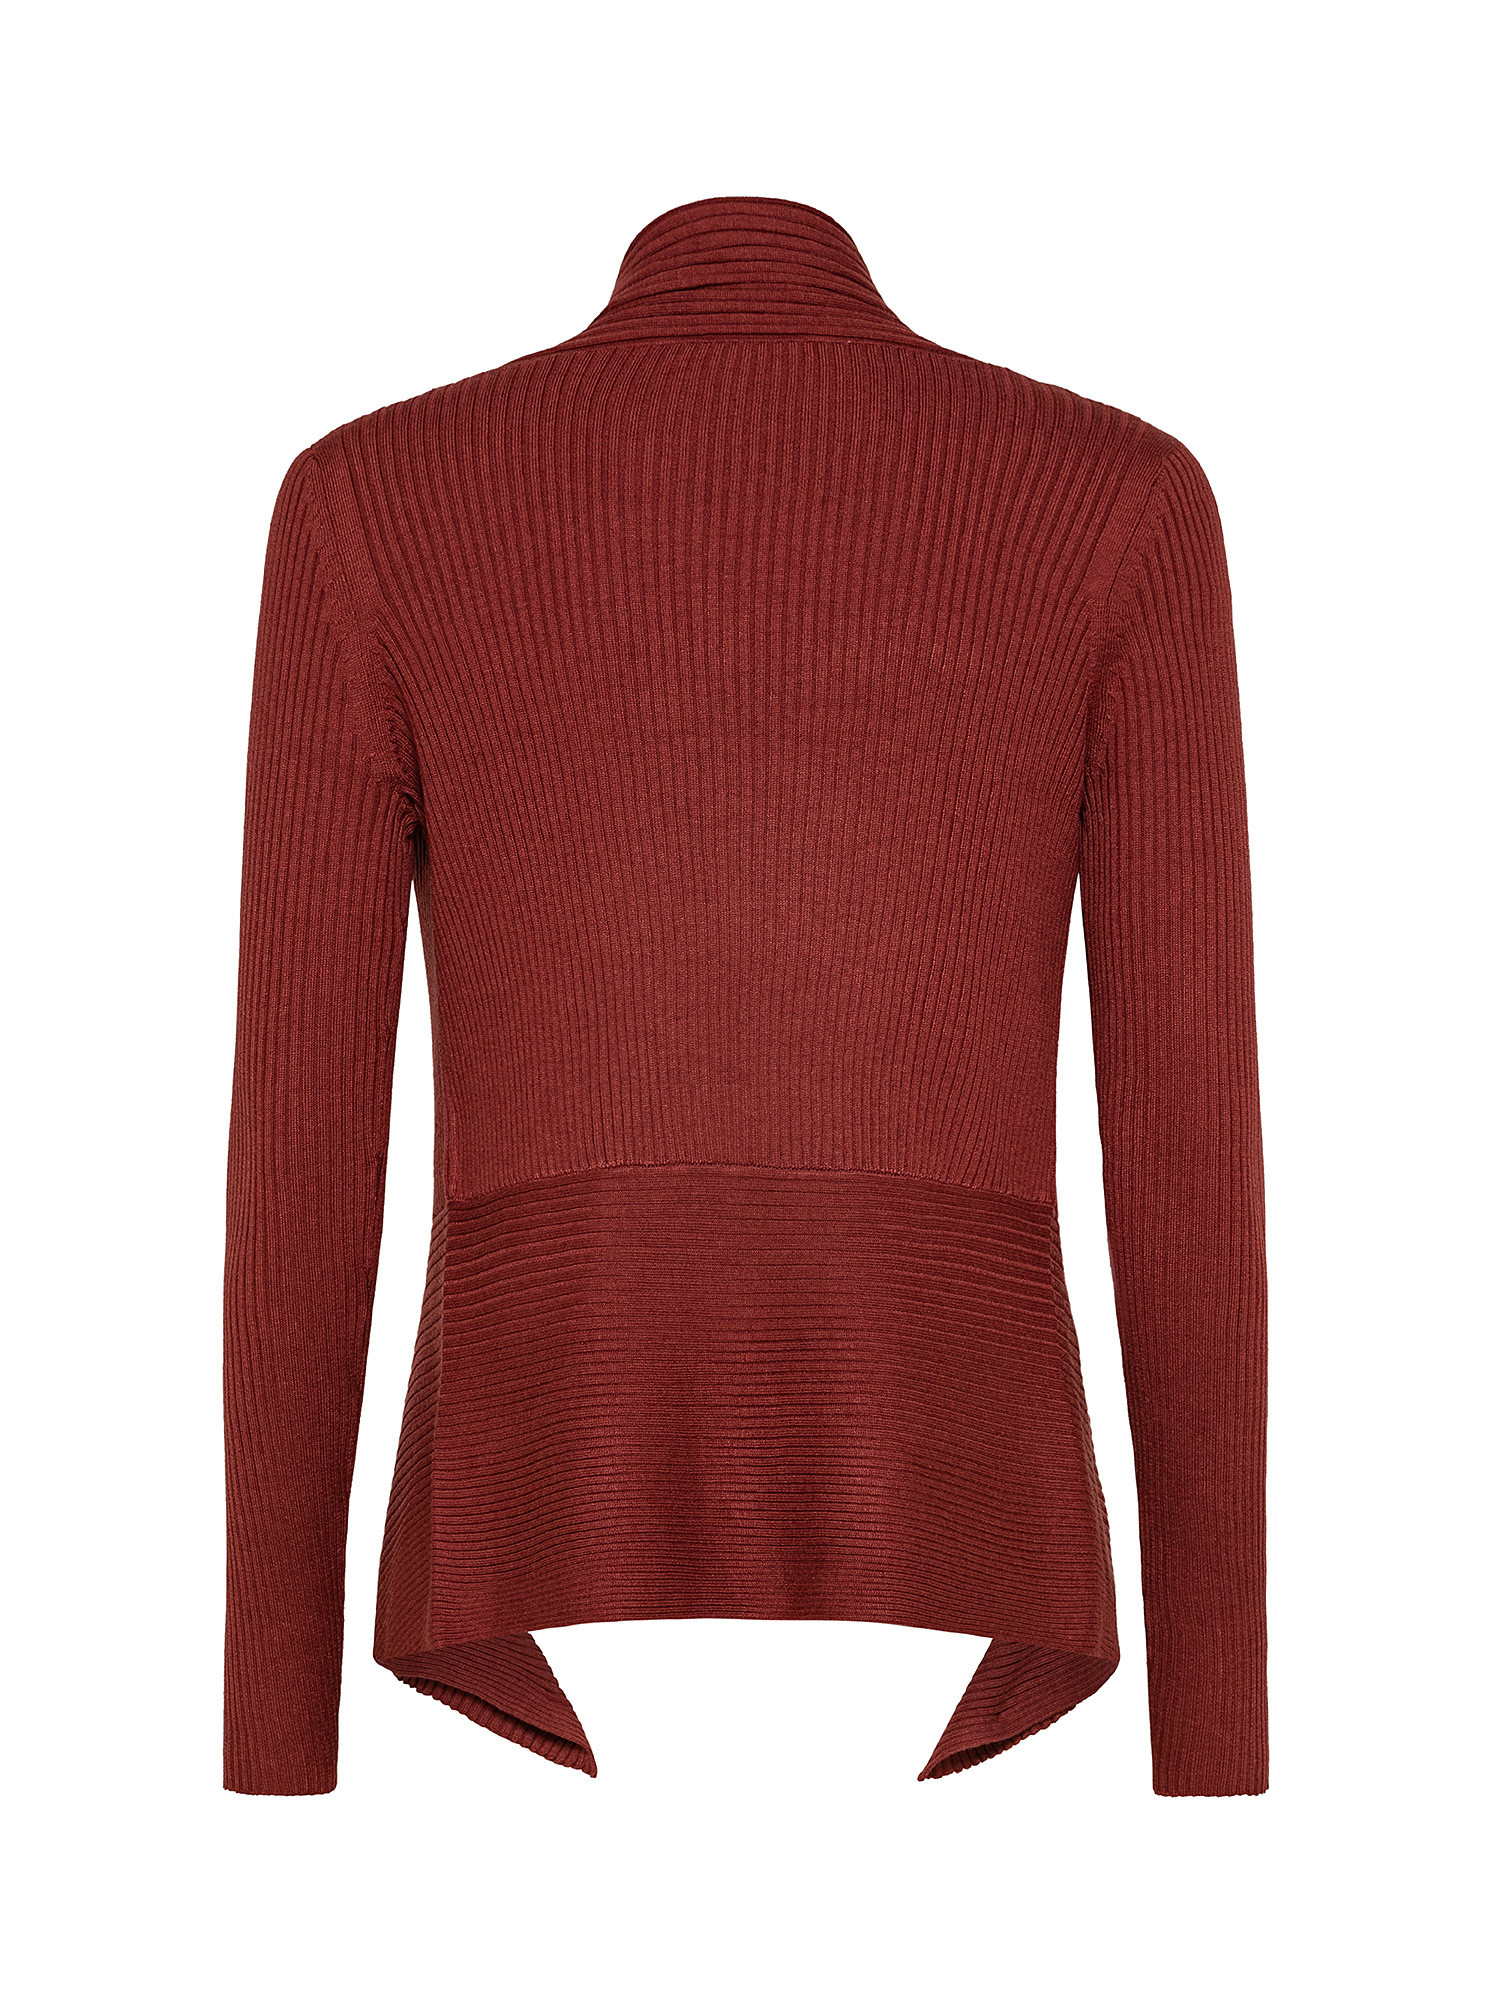 Open ribbed cardigan, Brick Red, large image number 1